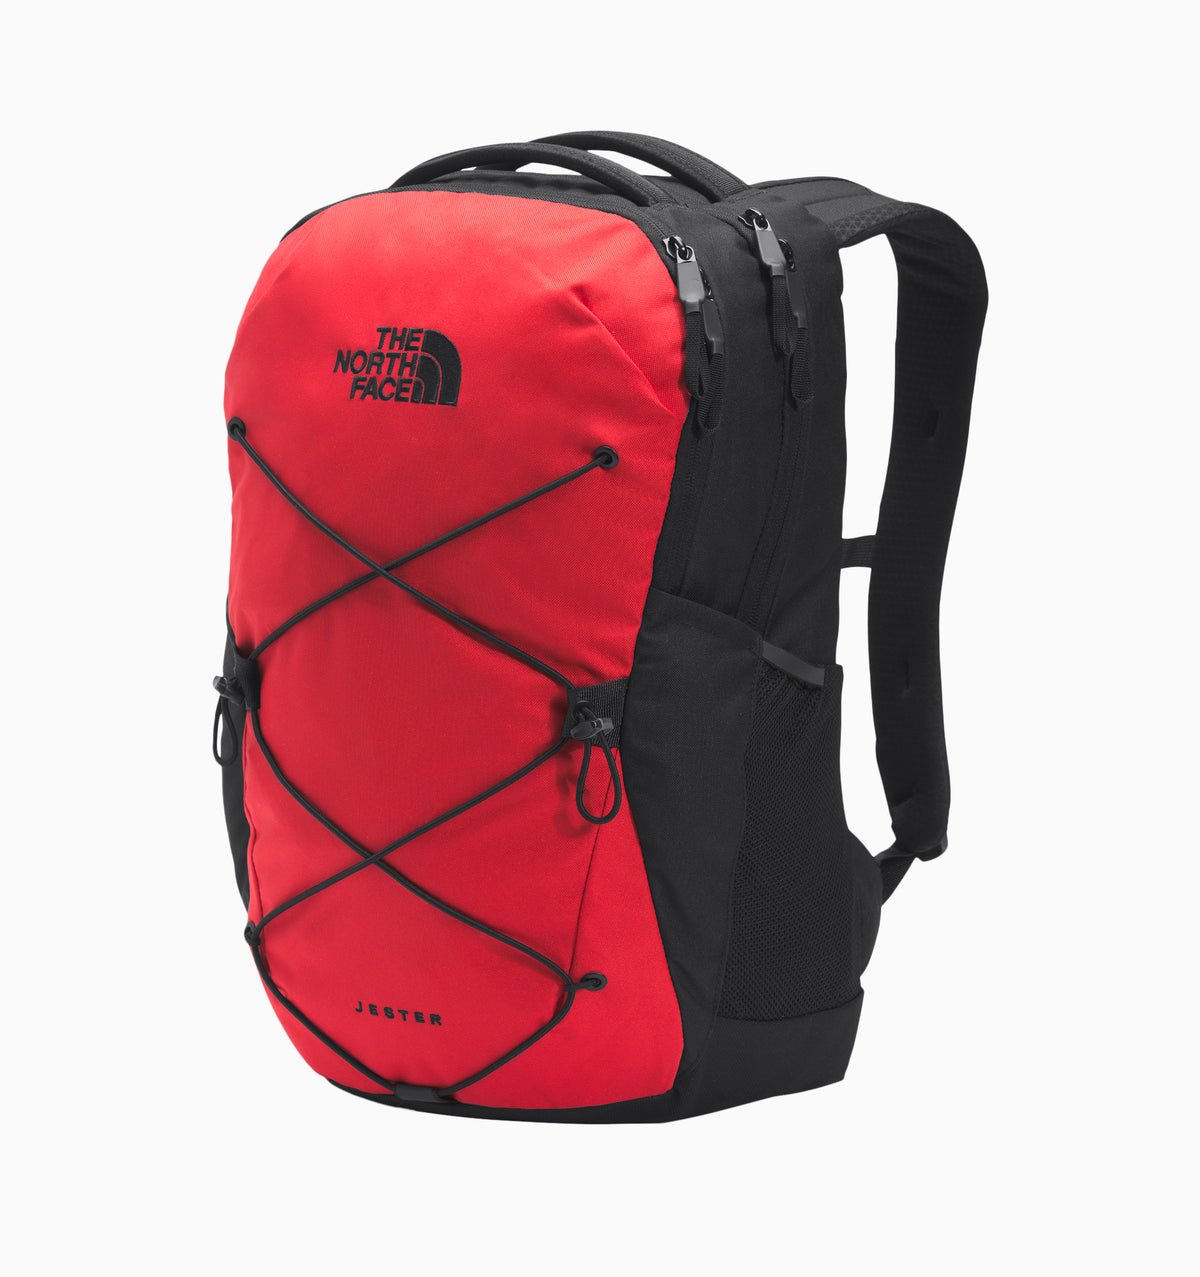 The North Face 16" Jester Laptop Backpack 28L - Red